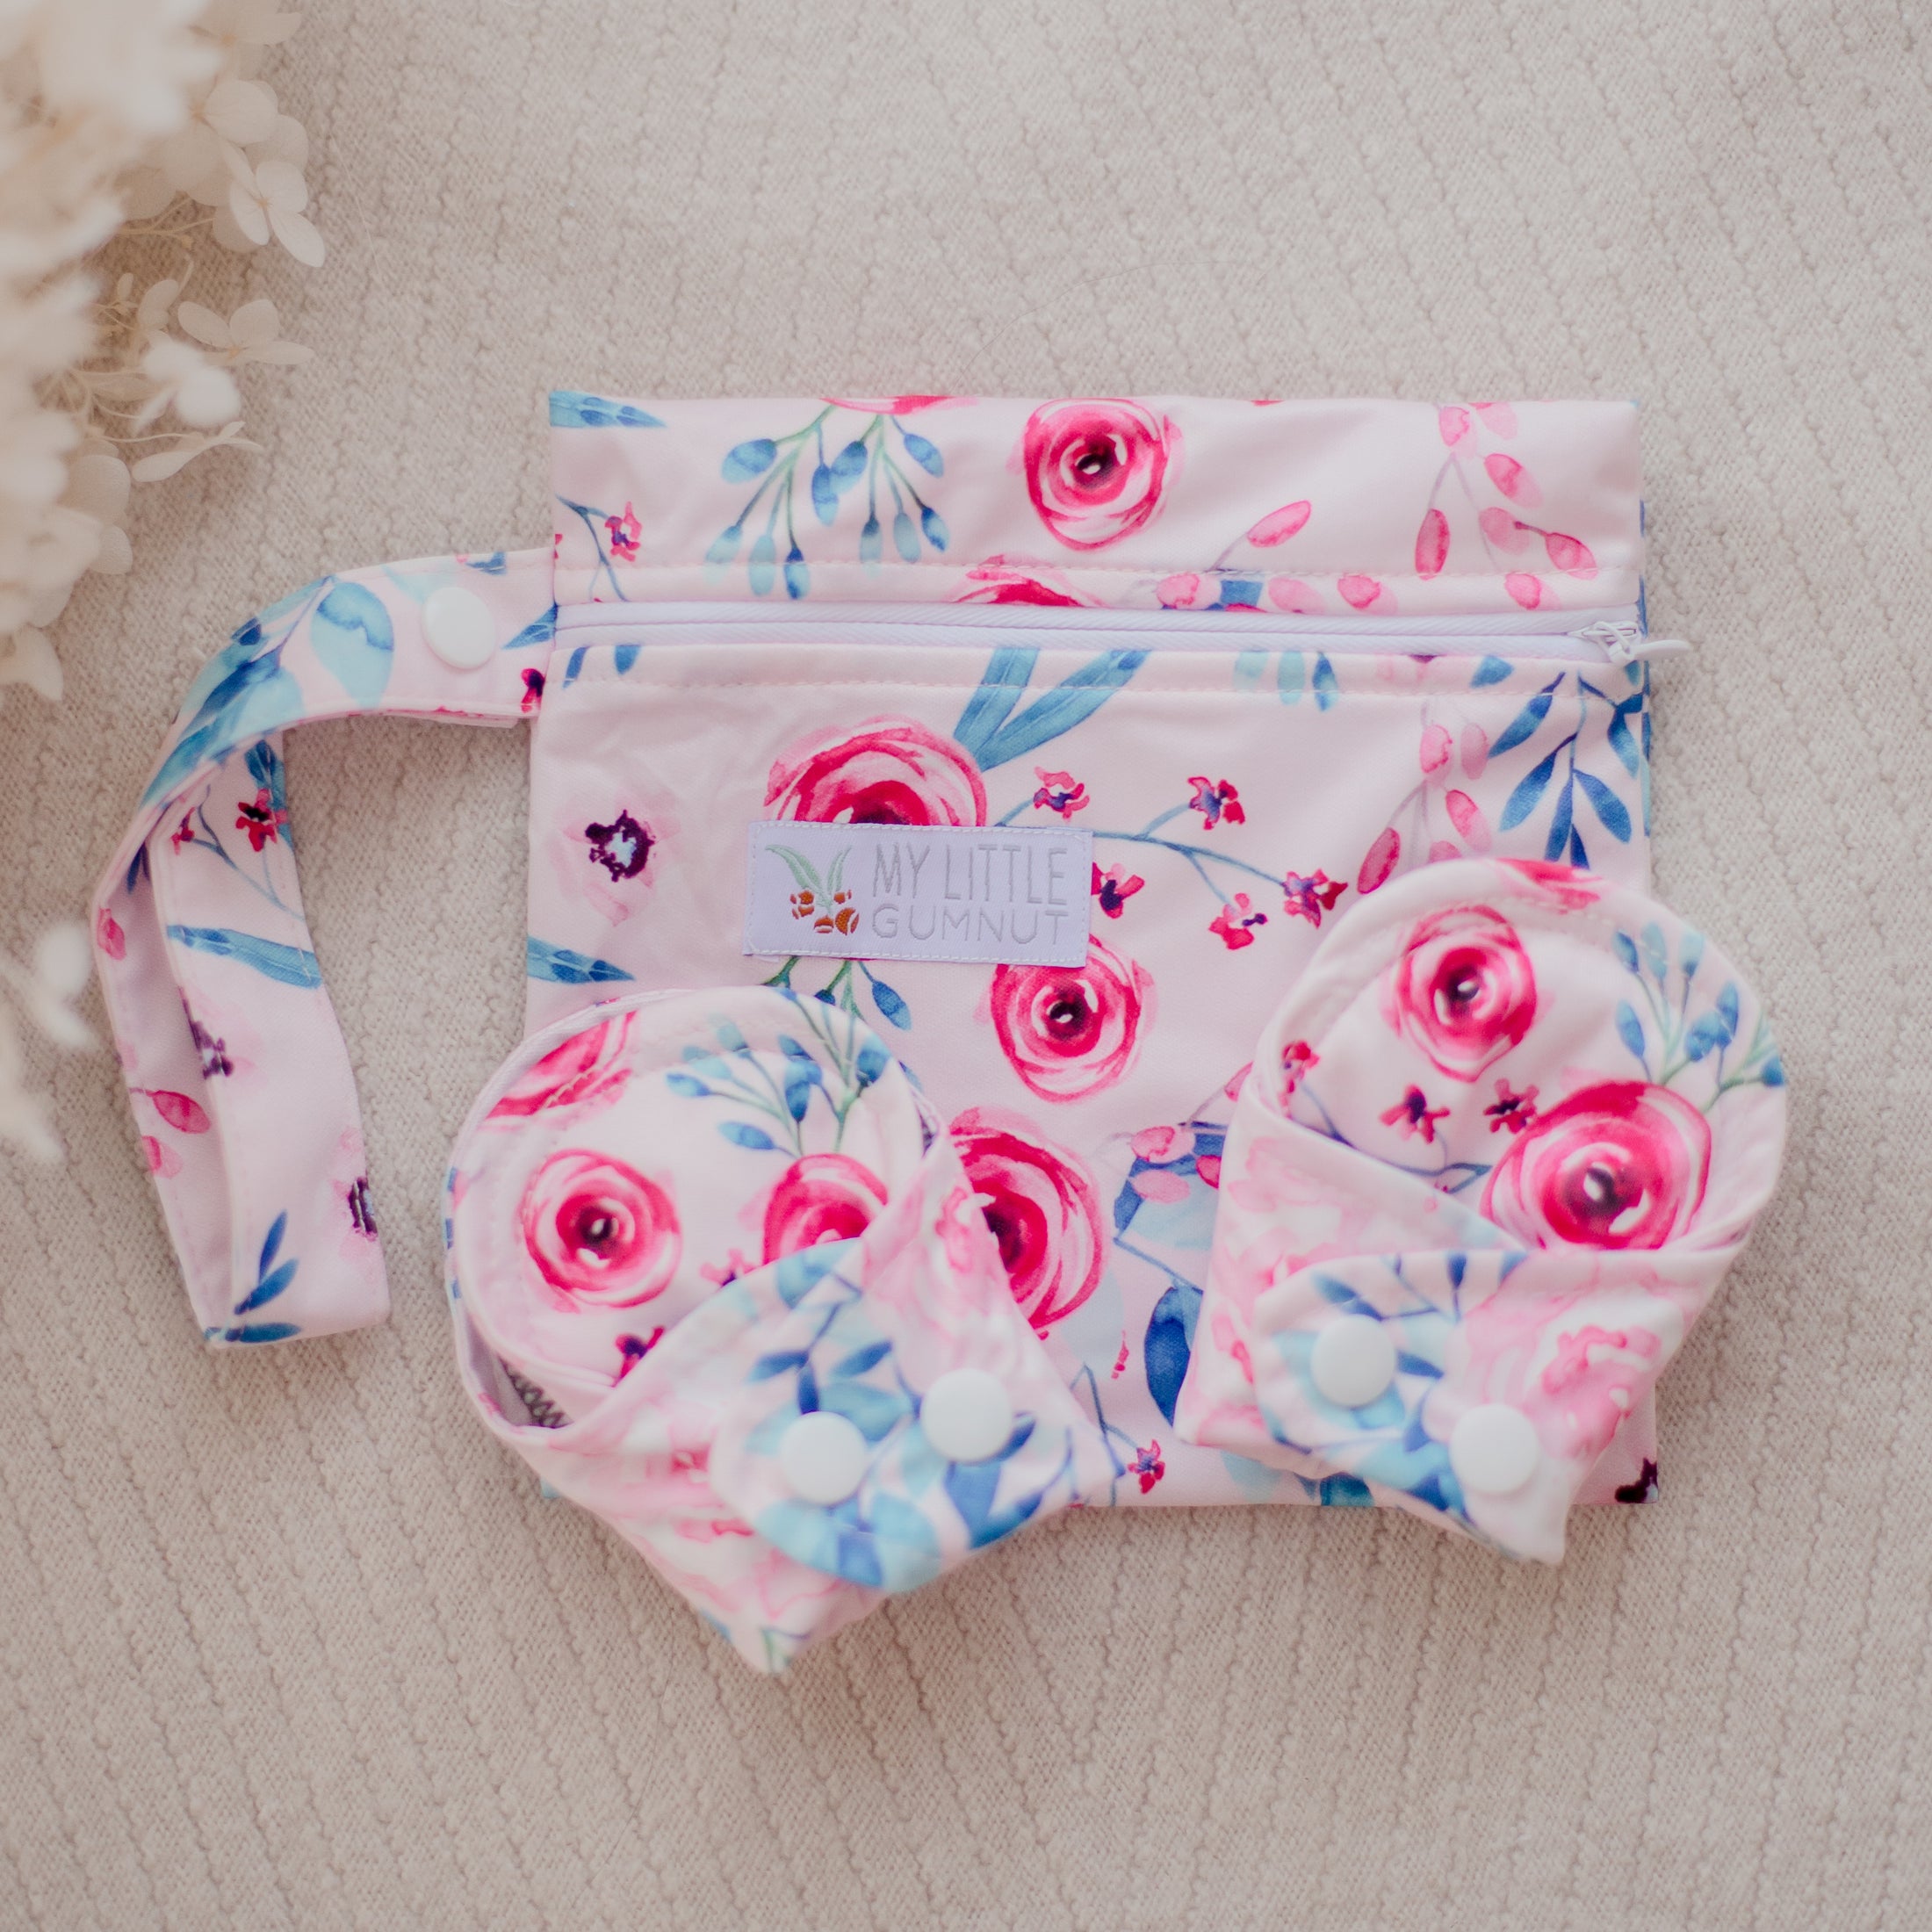 Reusable Cloth Menstrual Pads - 2 Pack with Wet Bag